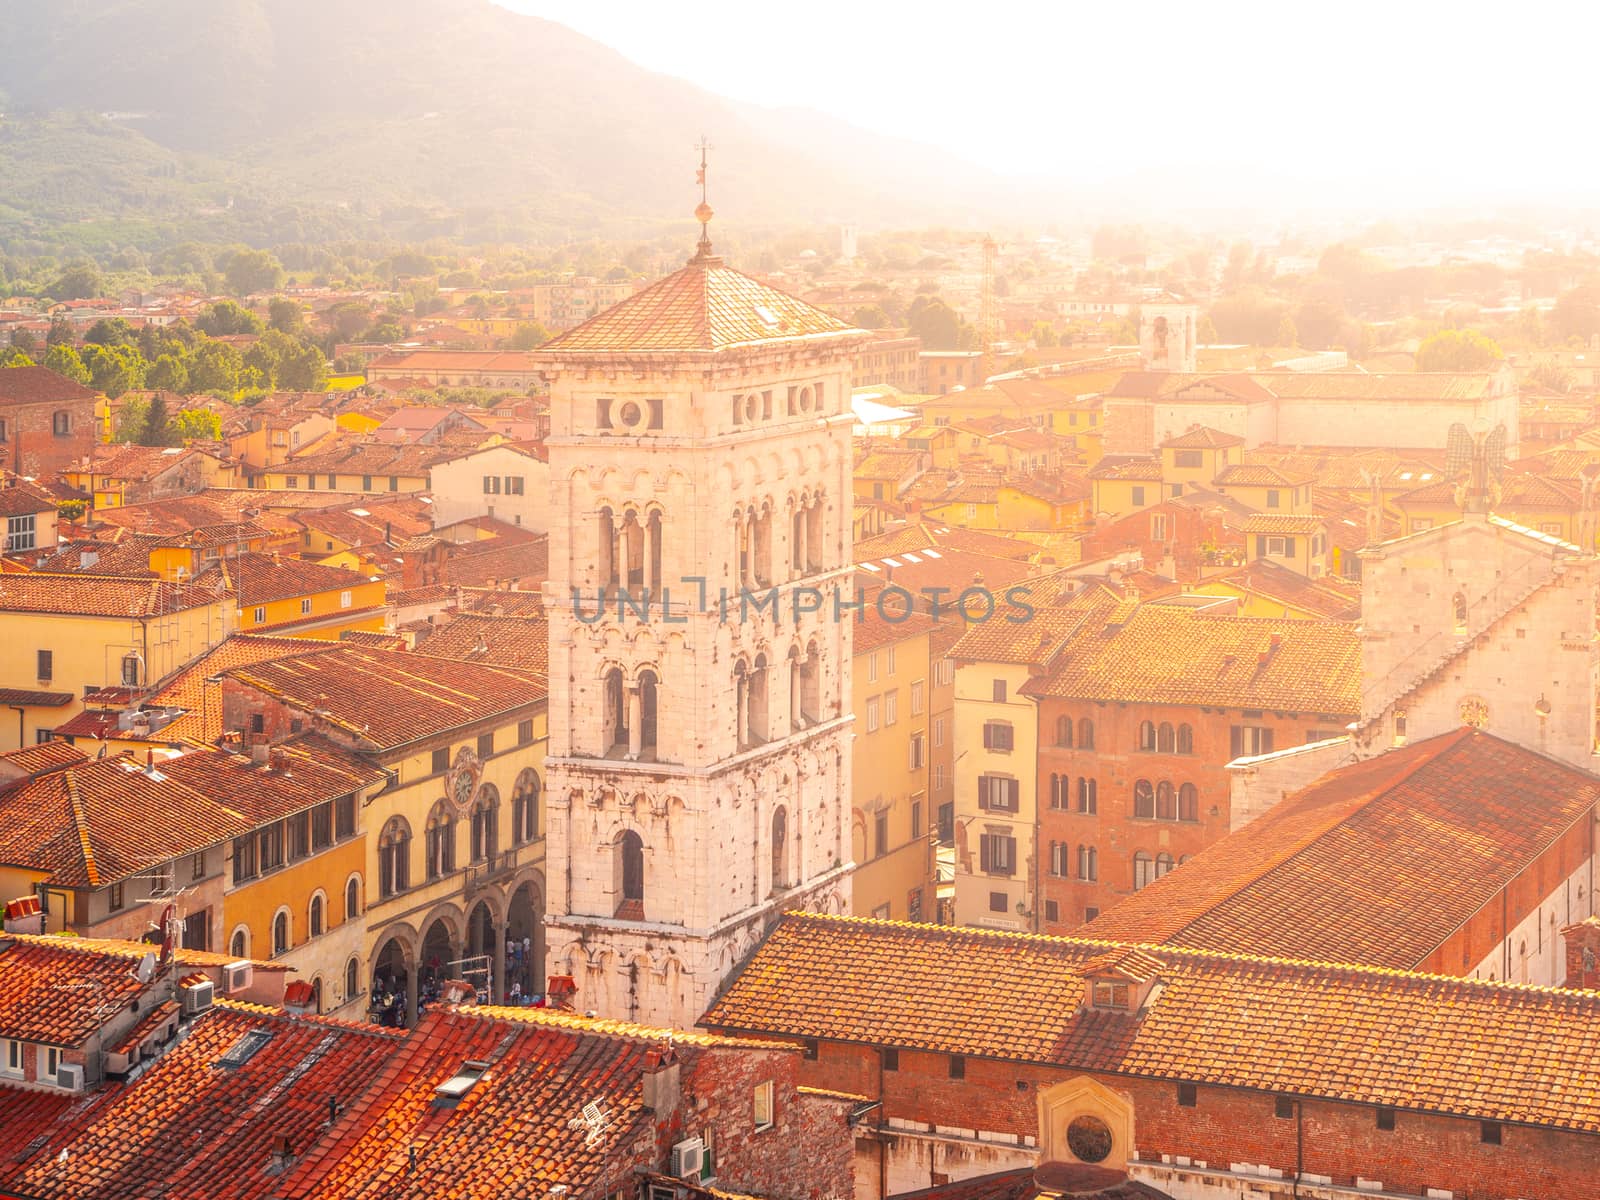 Bell tower of San Michele in Foro Basilica in Lucca, Tuscany, Italy.